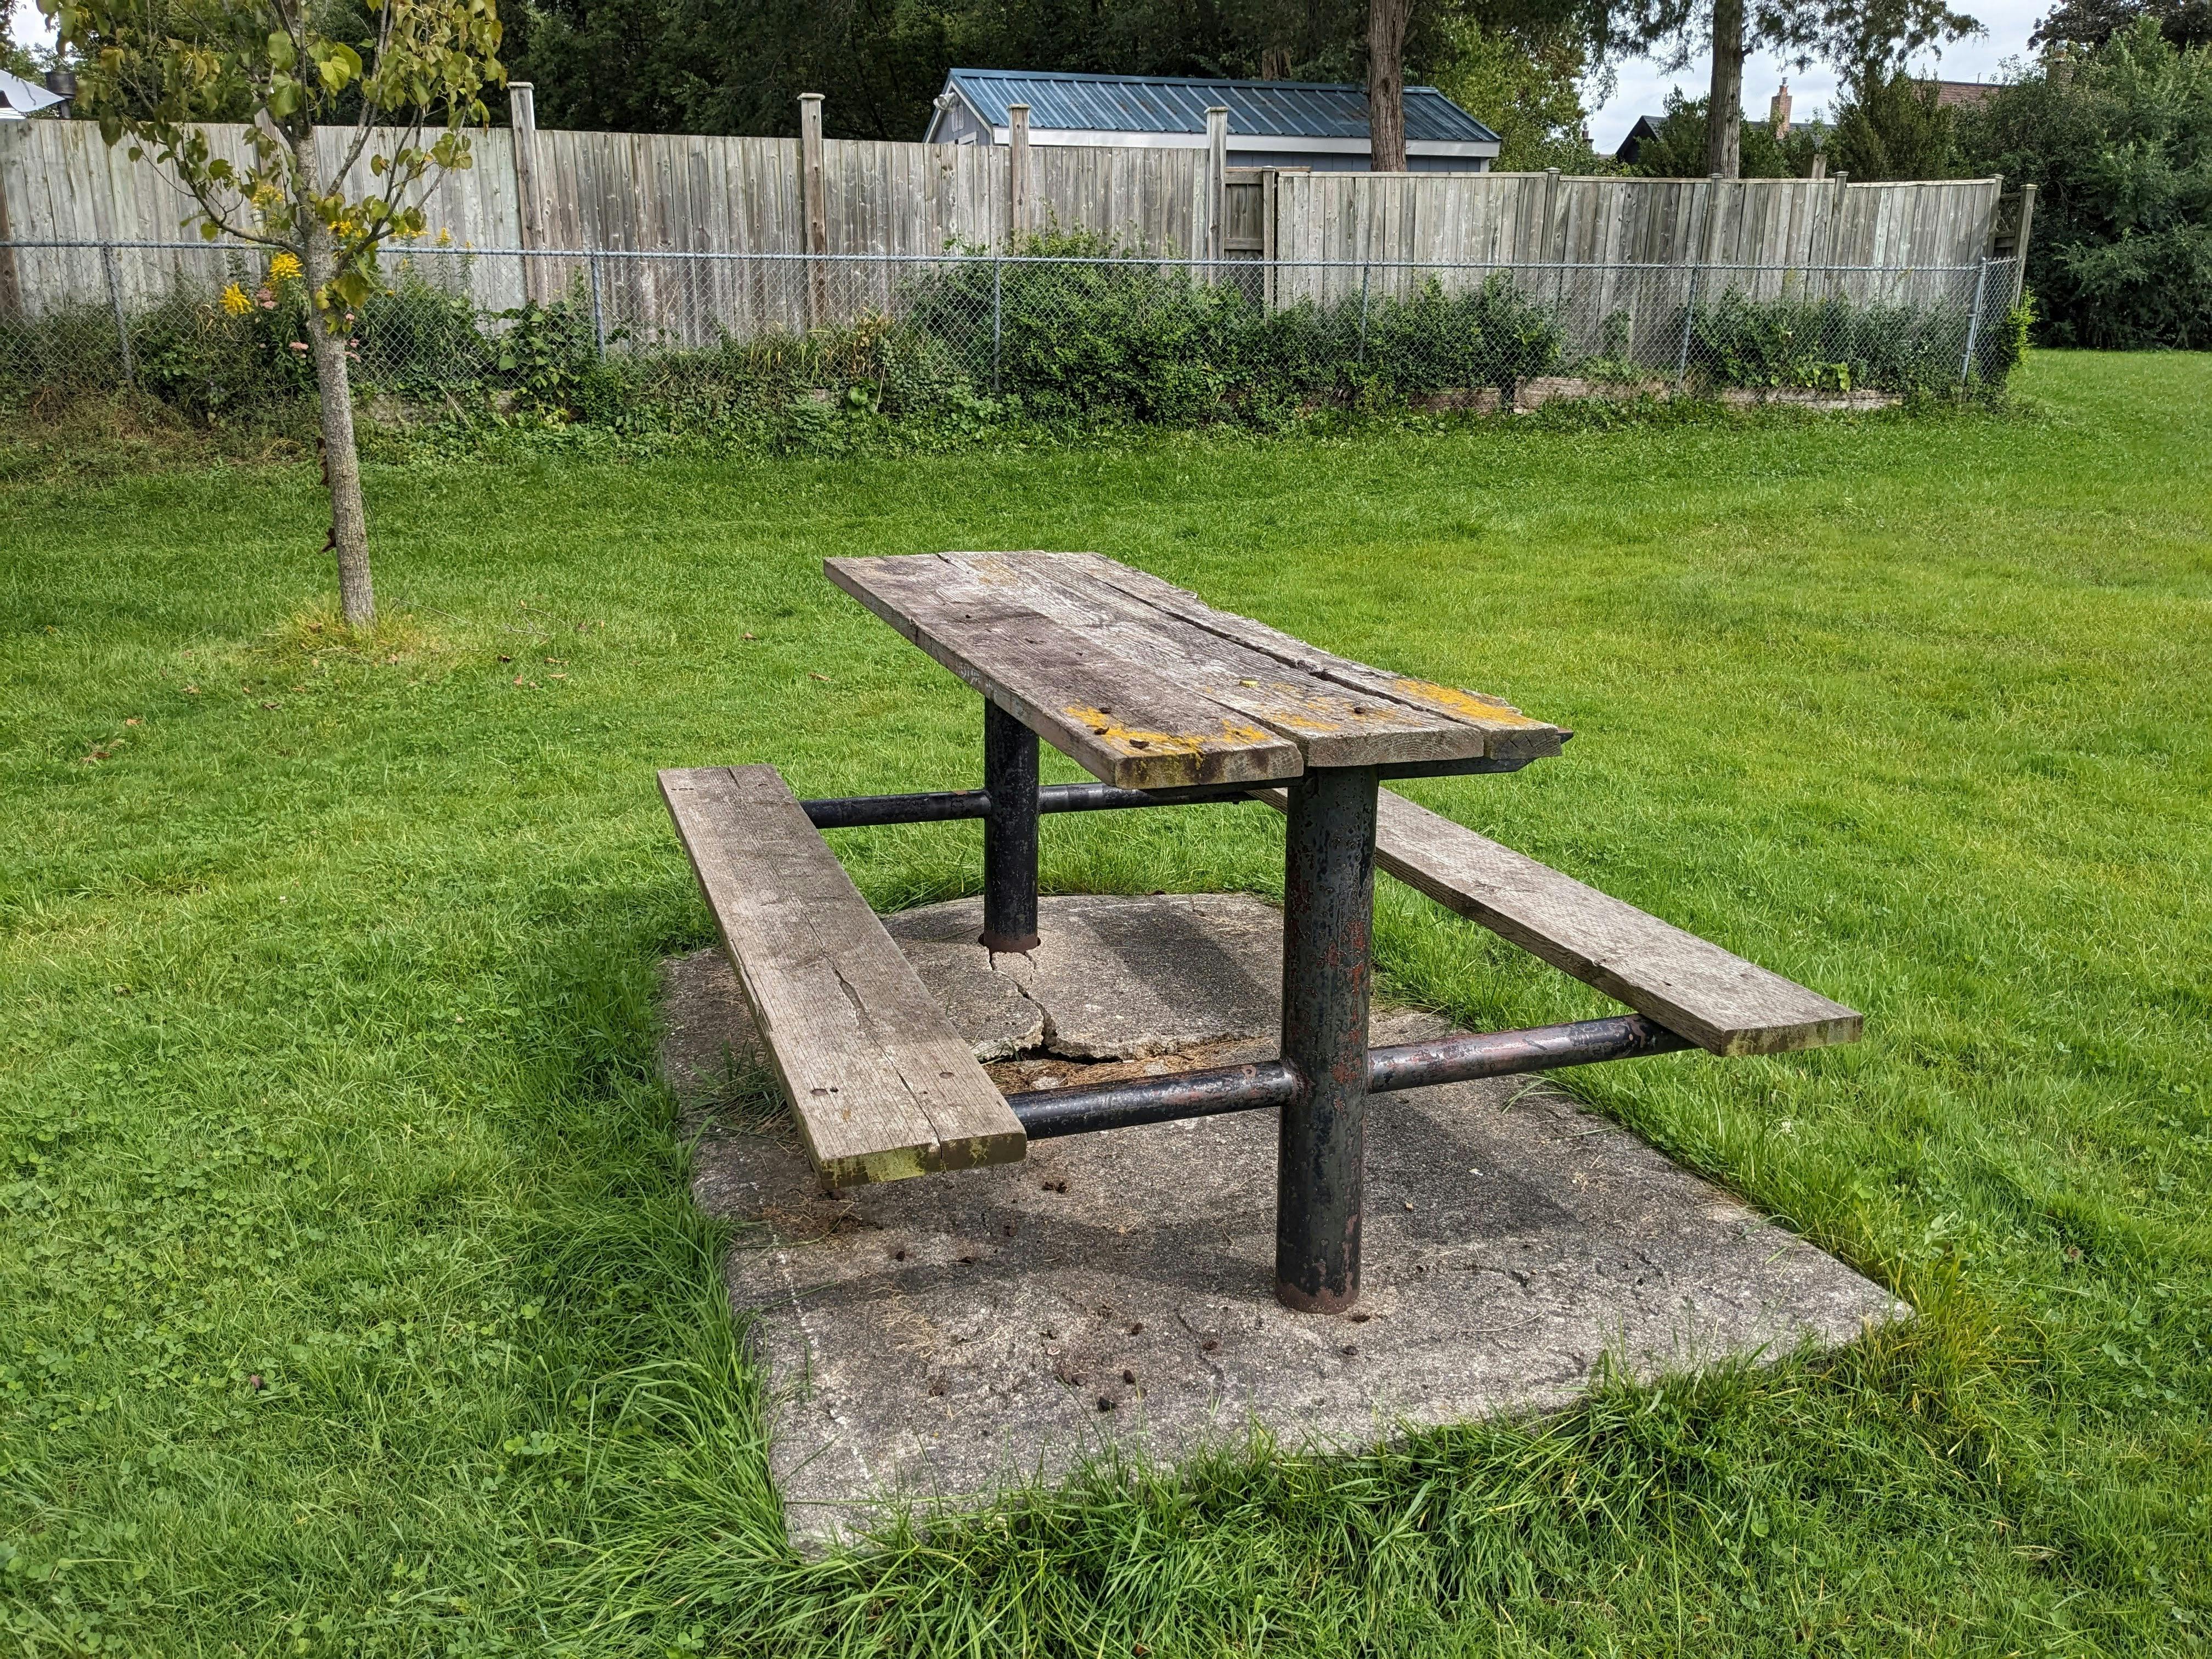 The existing picnic table in Murray Park.